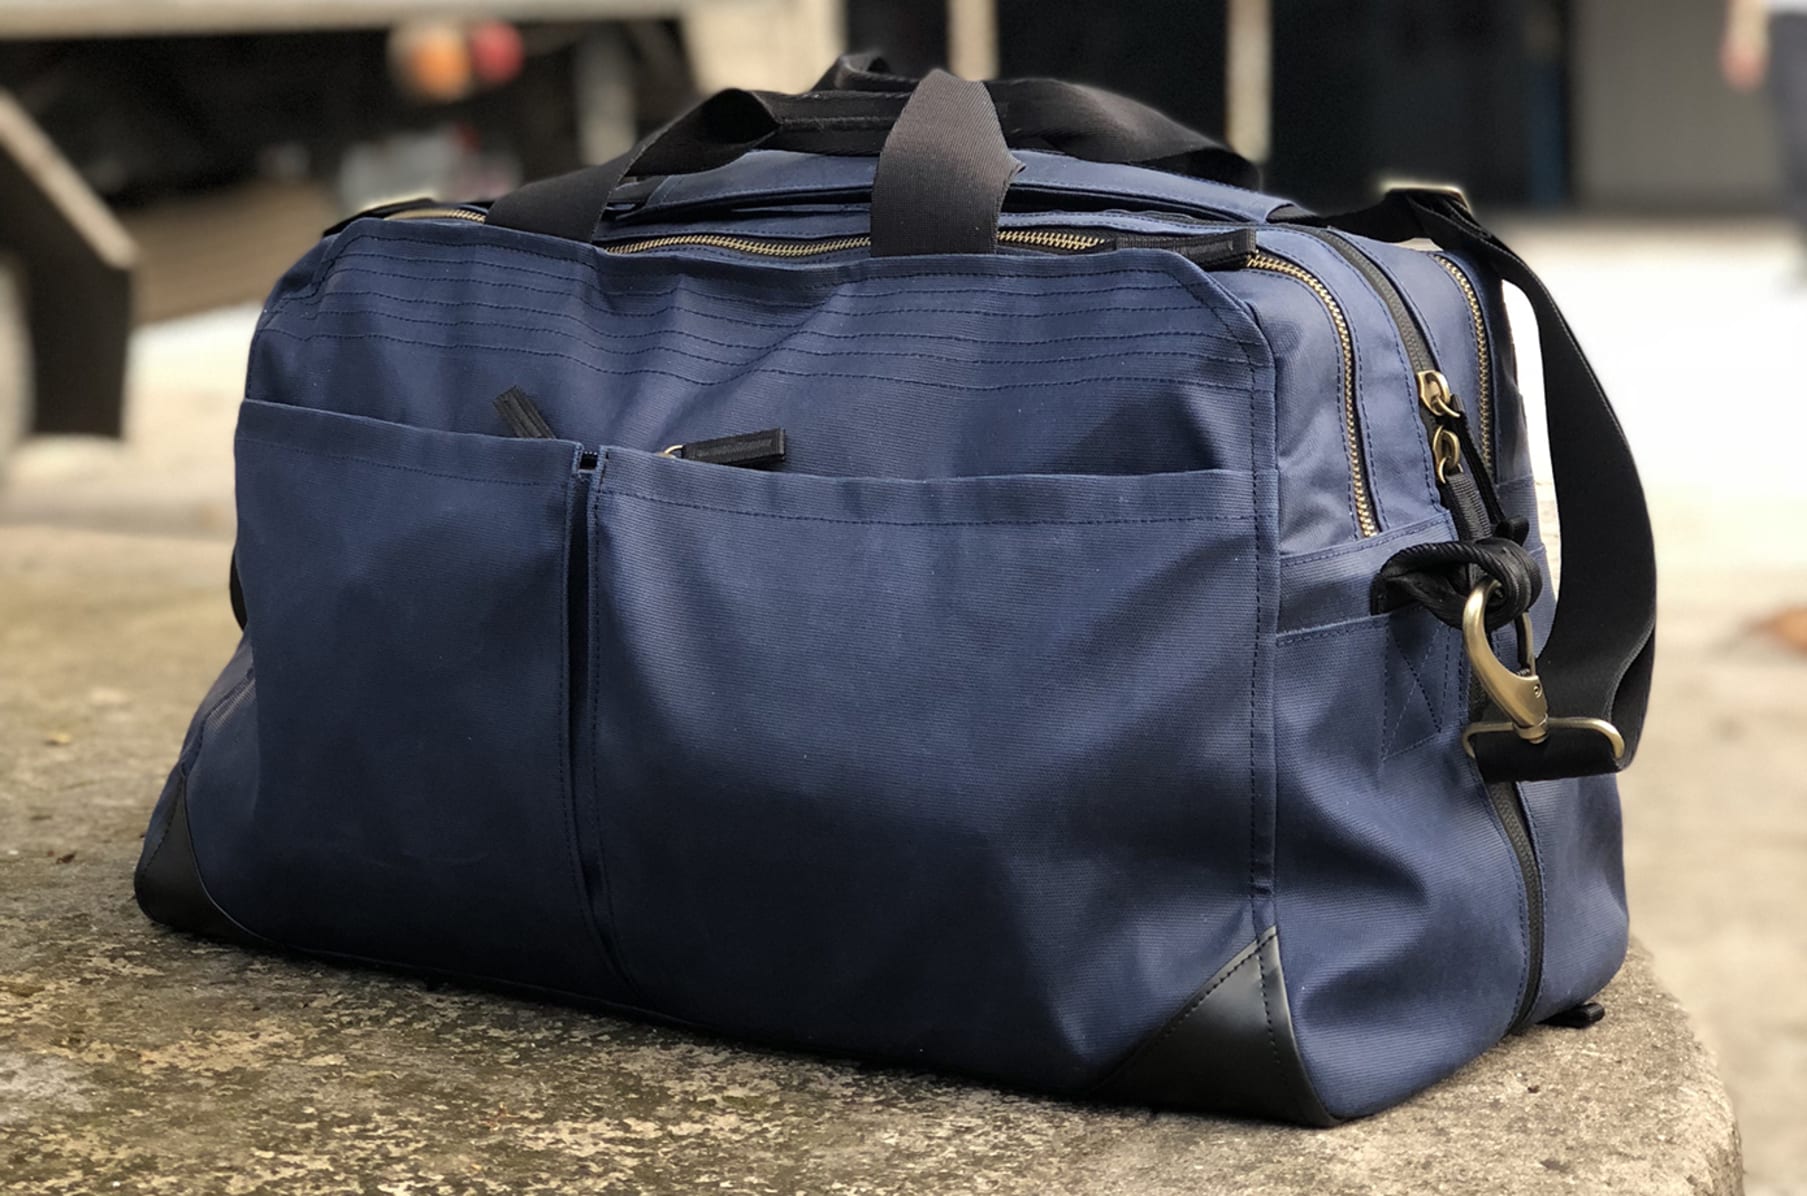 Generator Ship shape West The Pakt One: The Only Travel Bag You'll Ever Want | Indiegogo